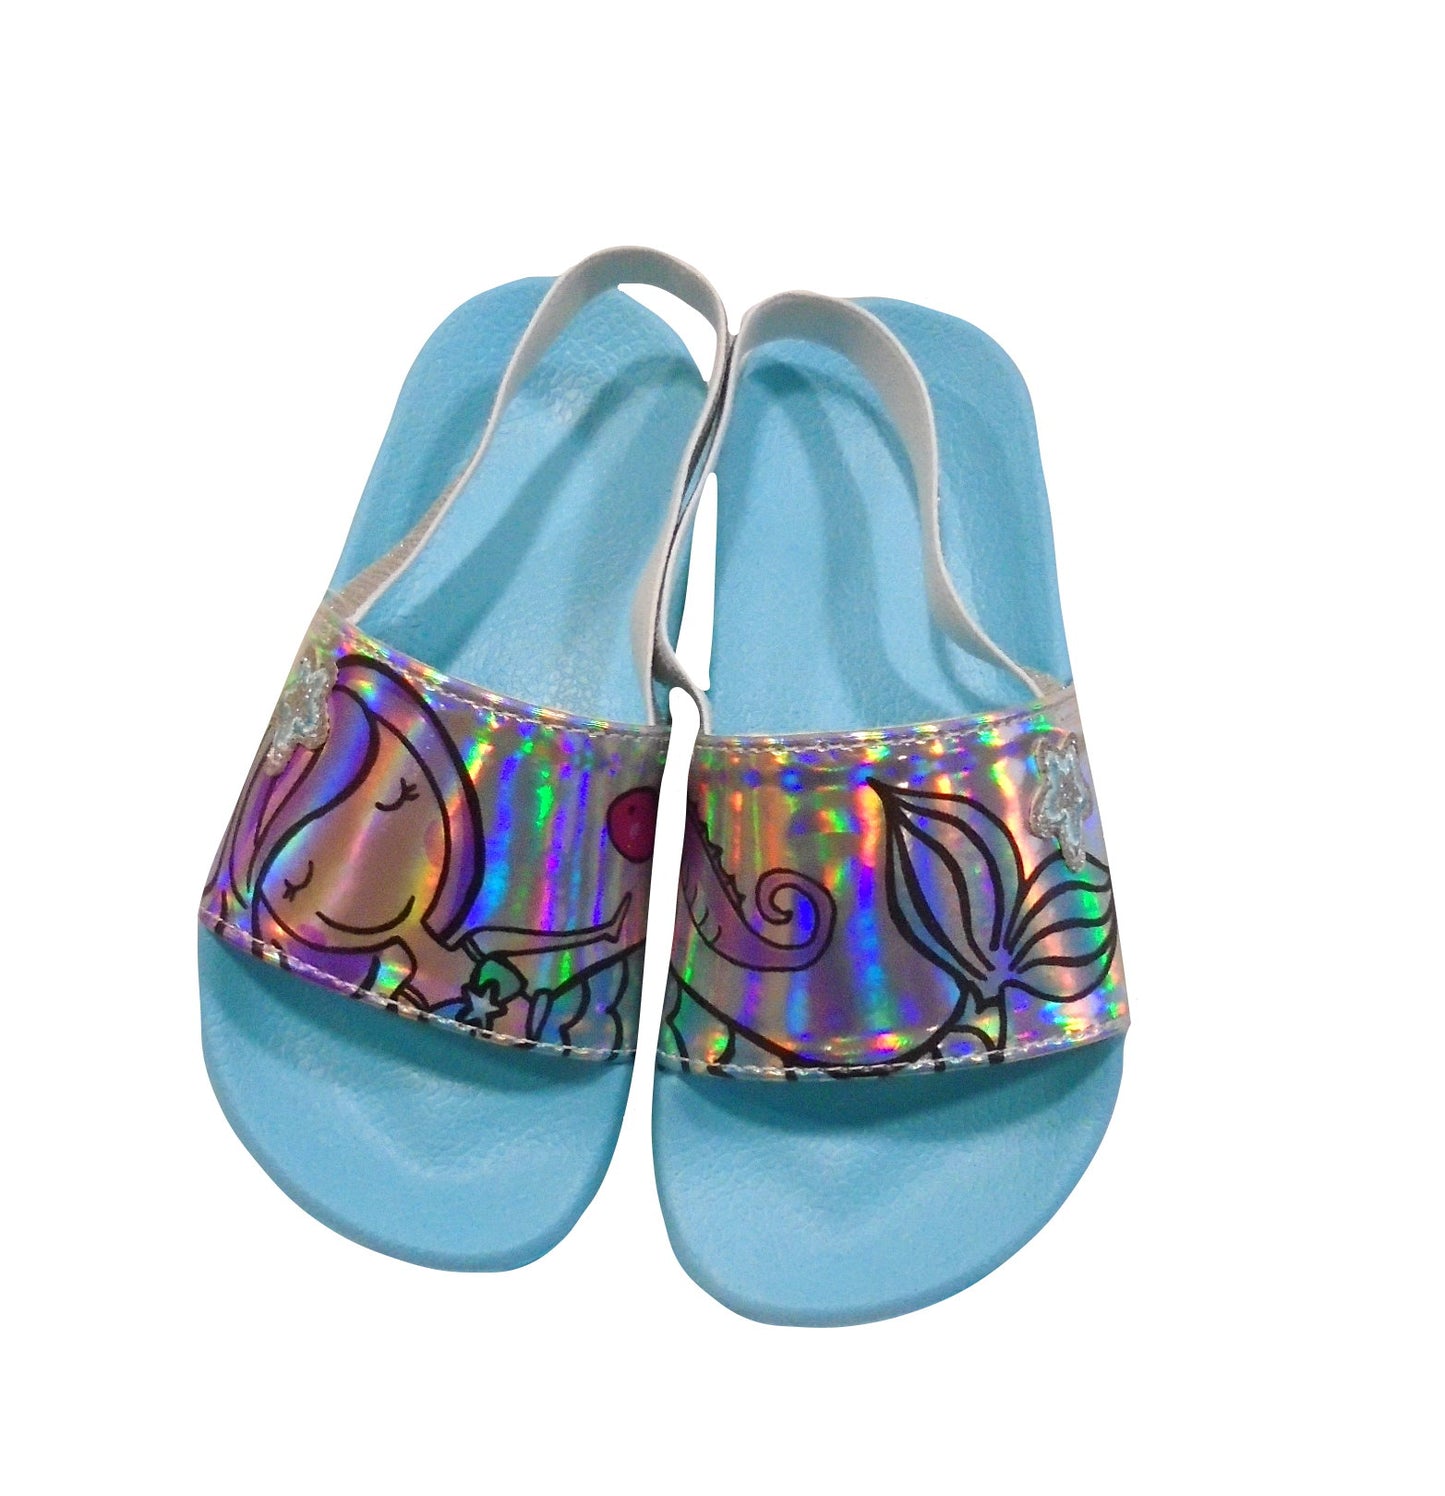 Girls Mermaid Slider Sandals with Ankle Strap Great for Summer